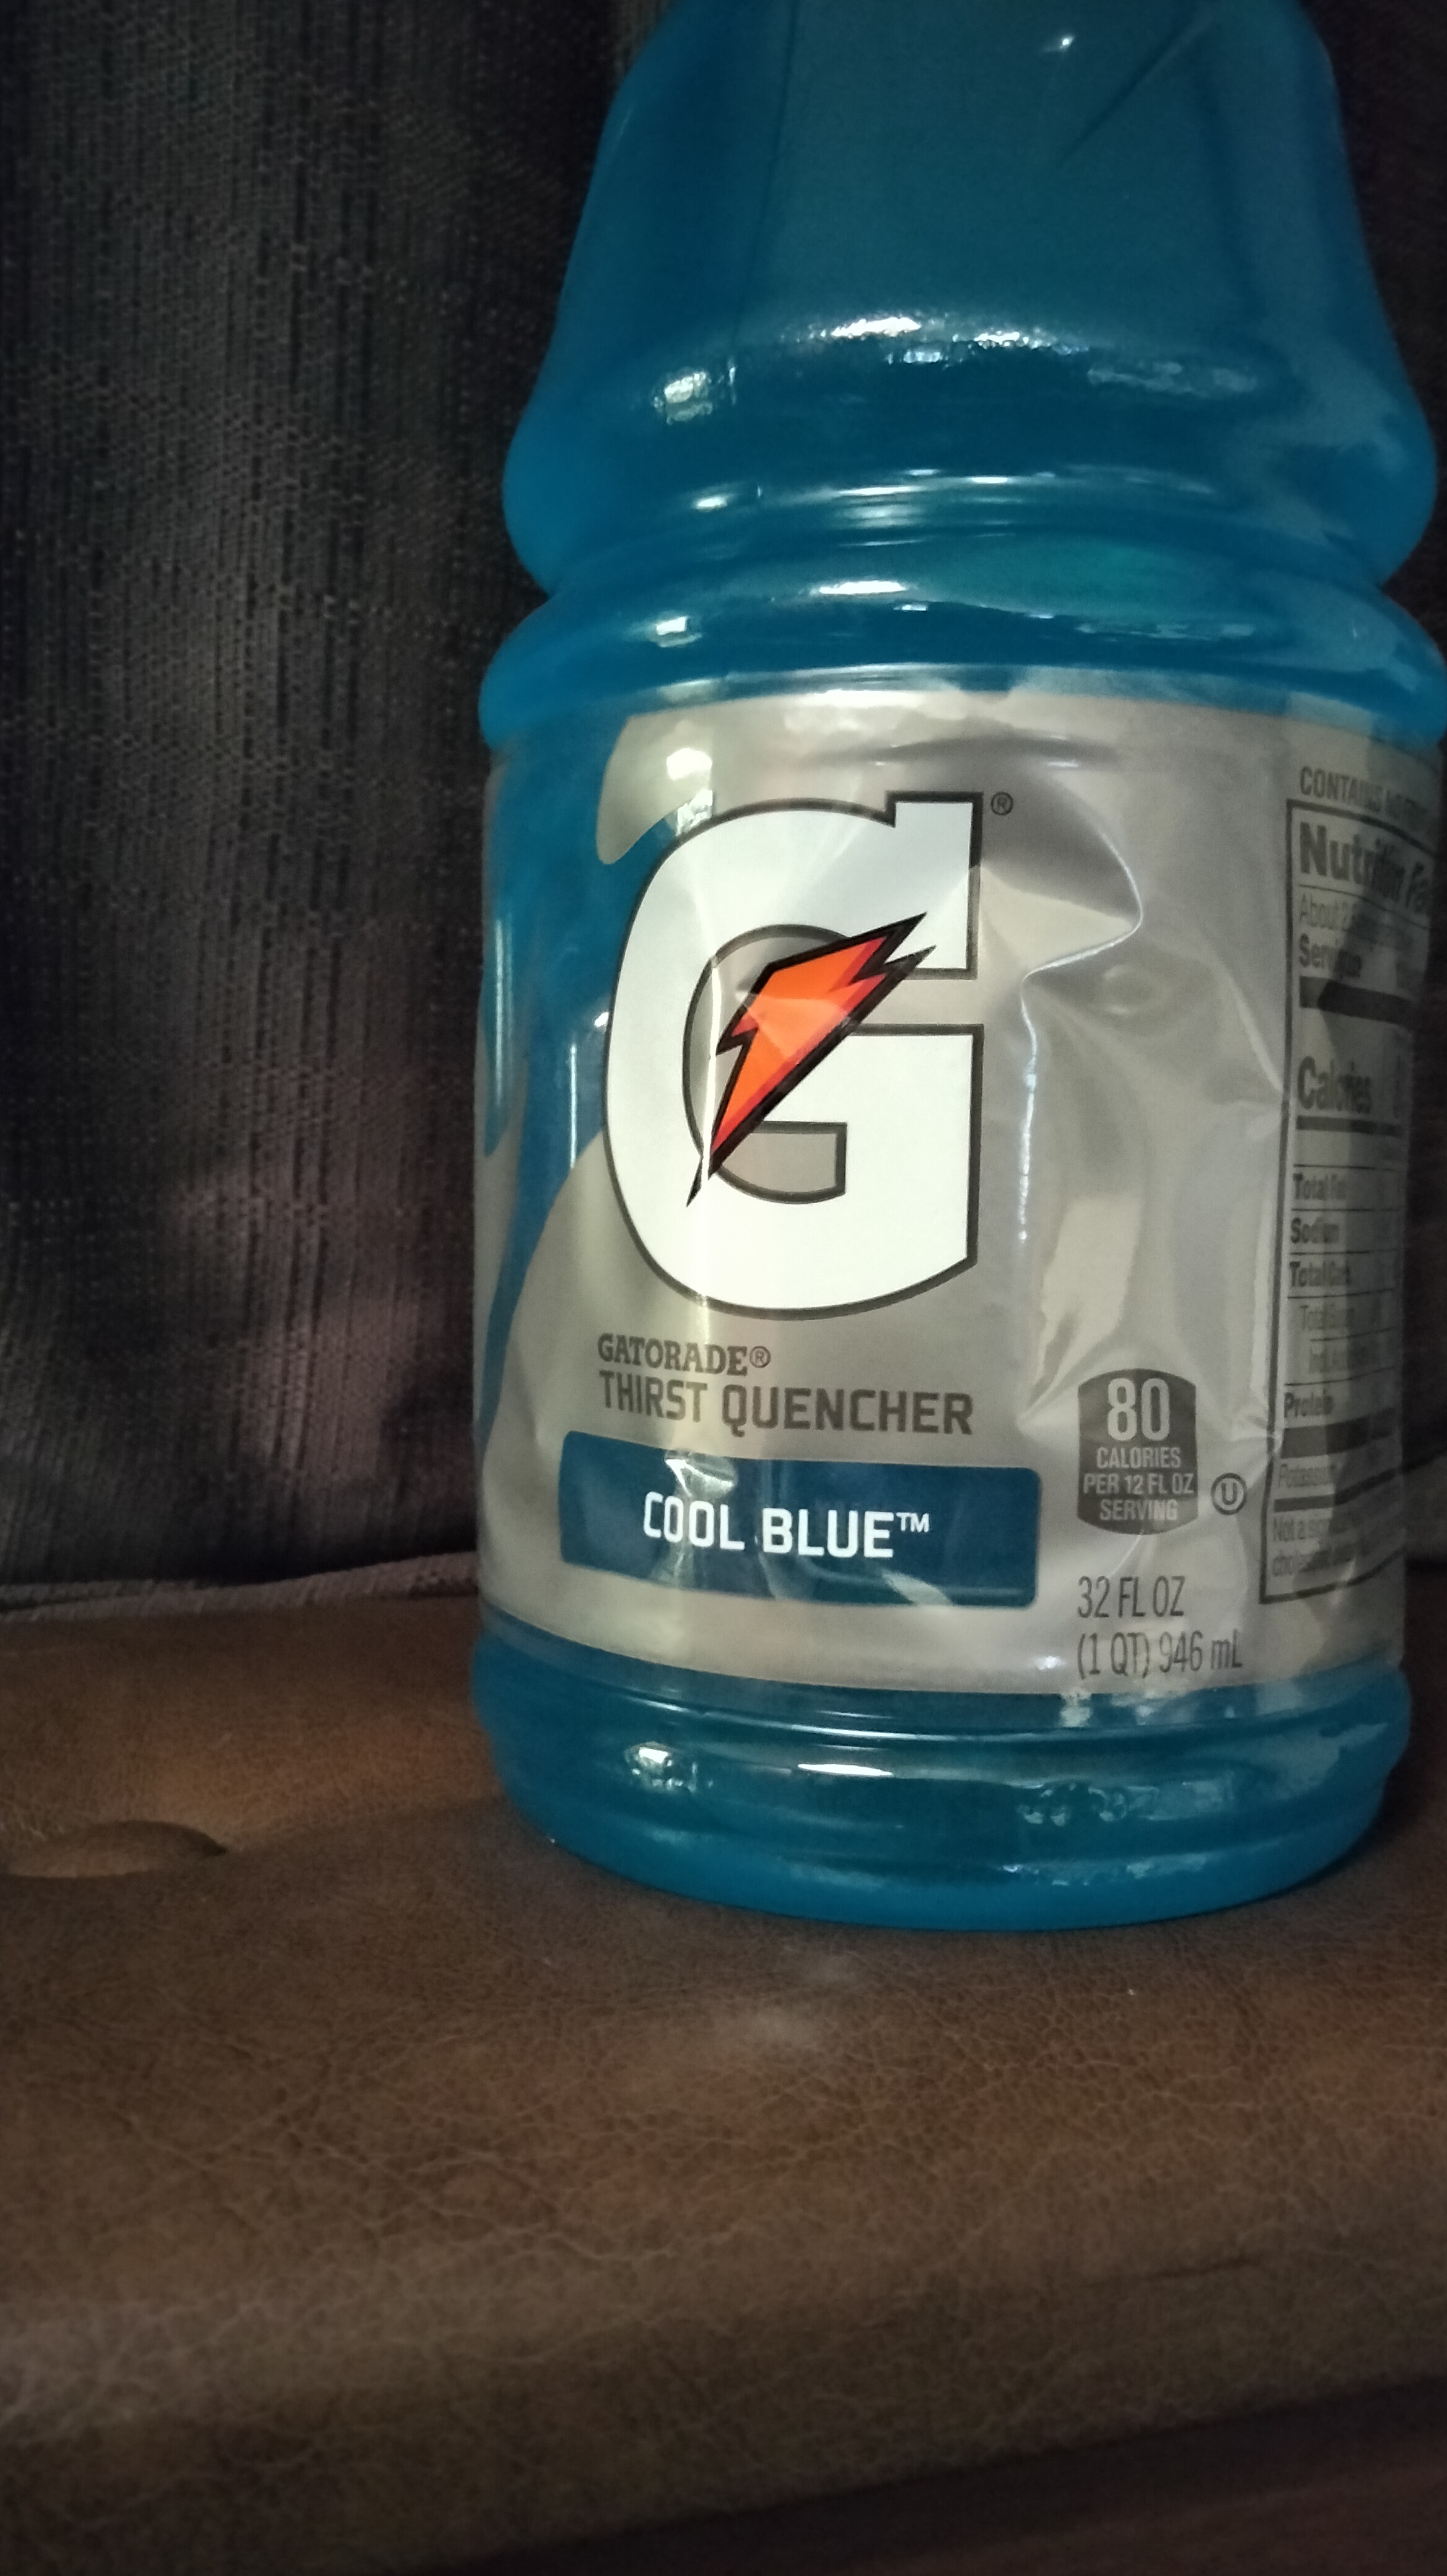 $0.99 cents for a 32 oz bottle of Gatorade